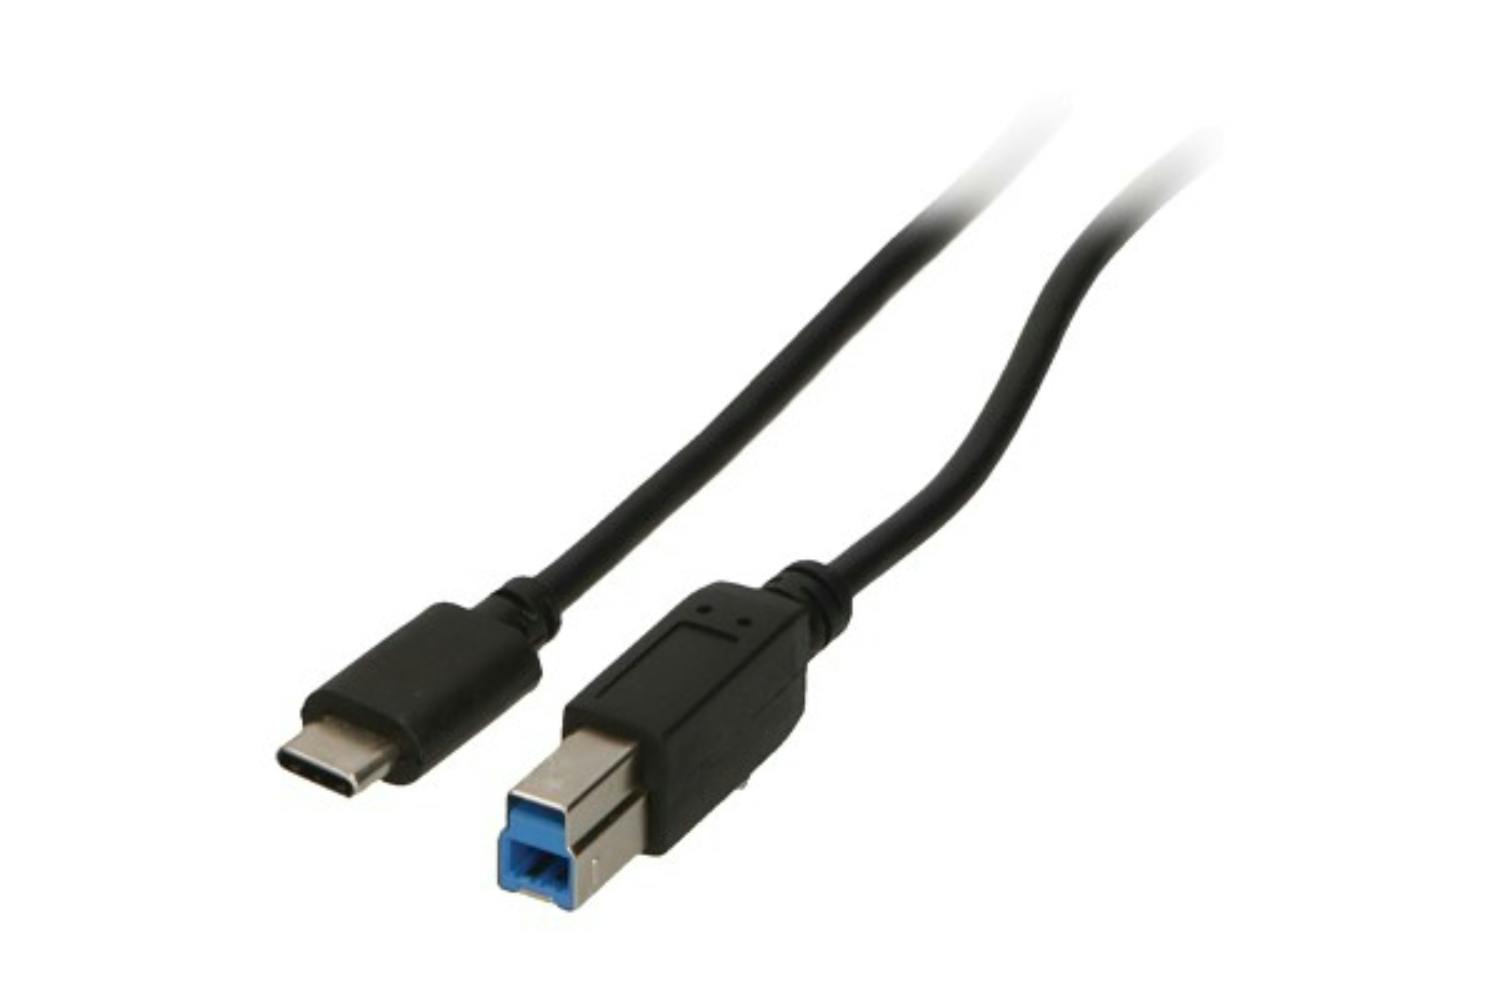 2-Power USB Type-C to USB Type-B Data Cable